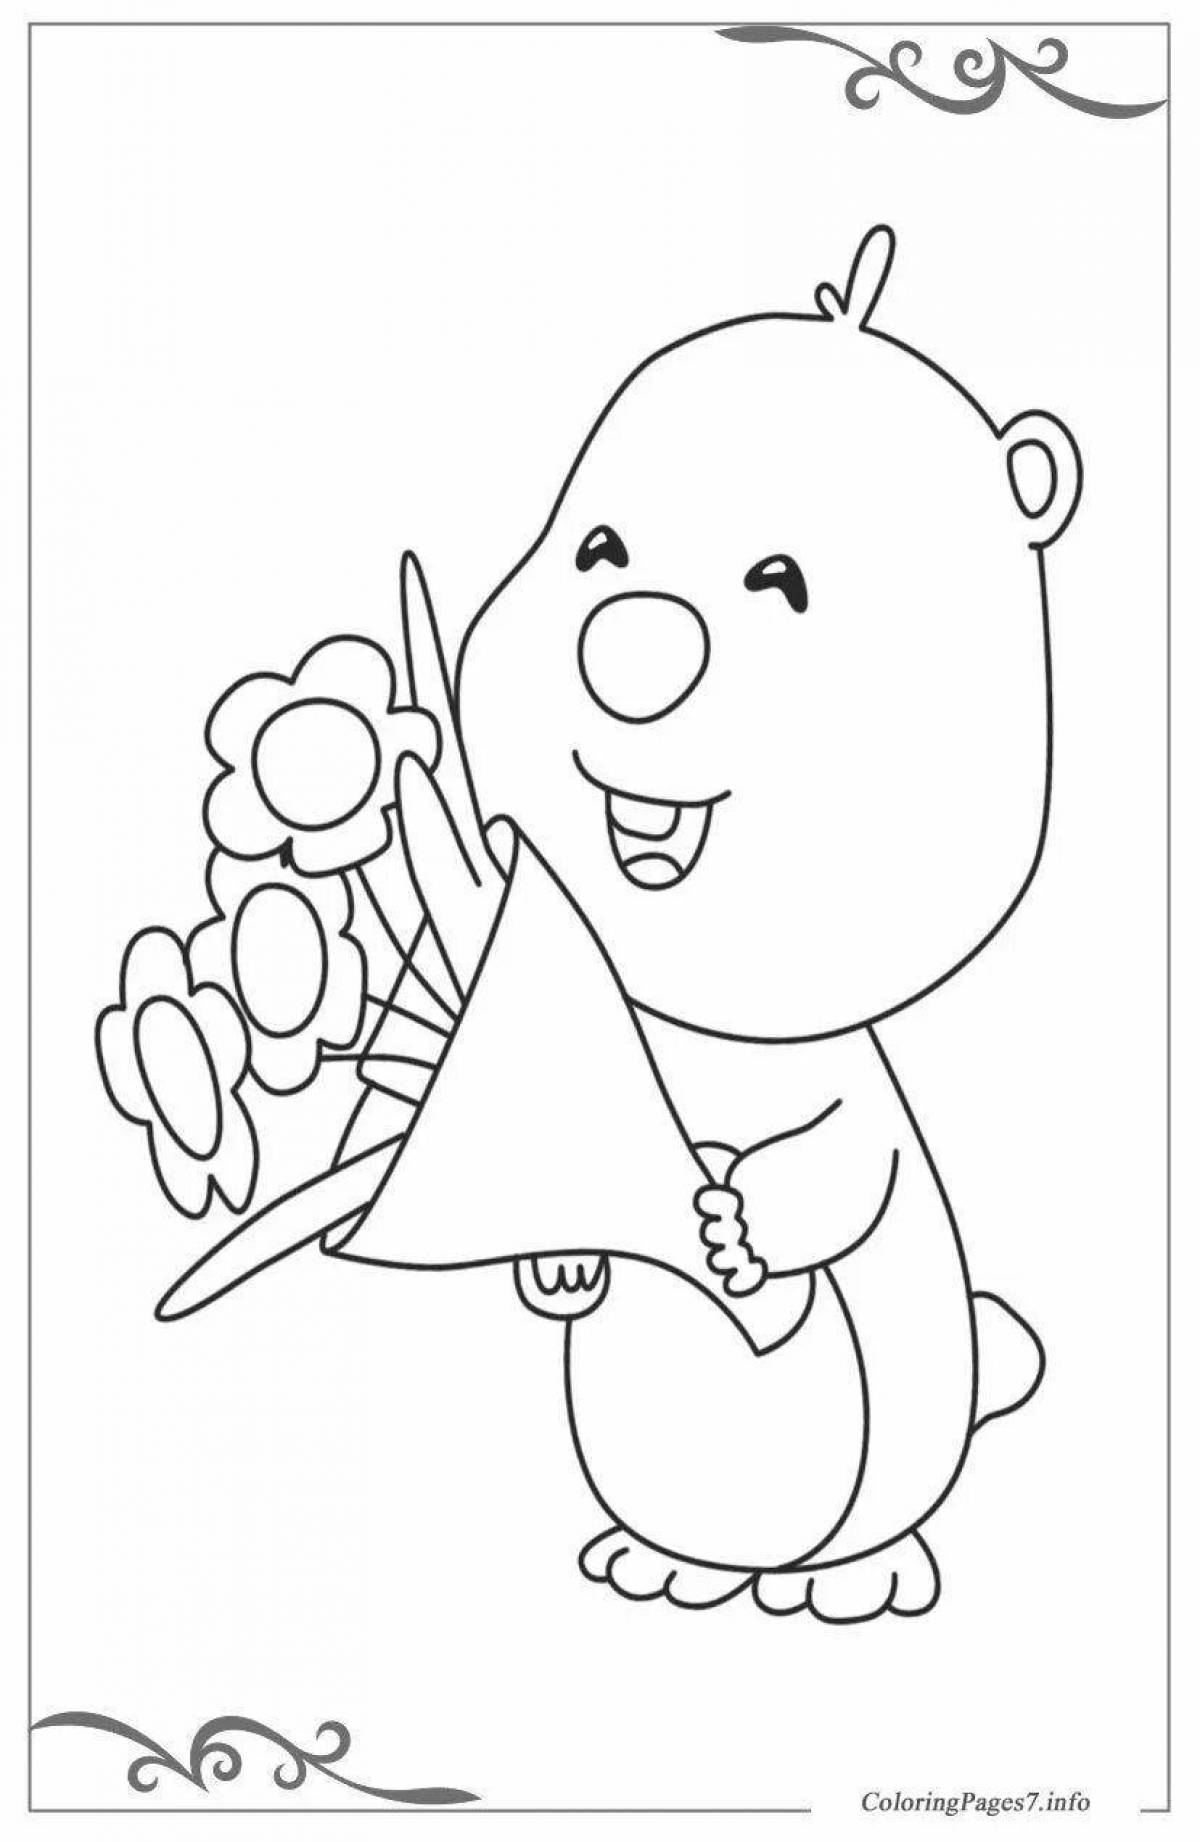 Colorful duda and dada coloring page